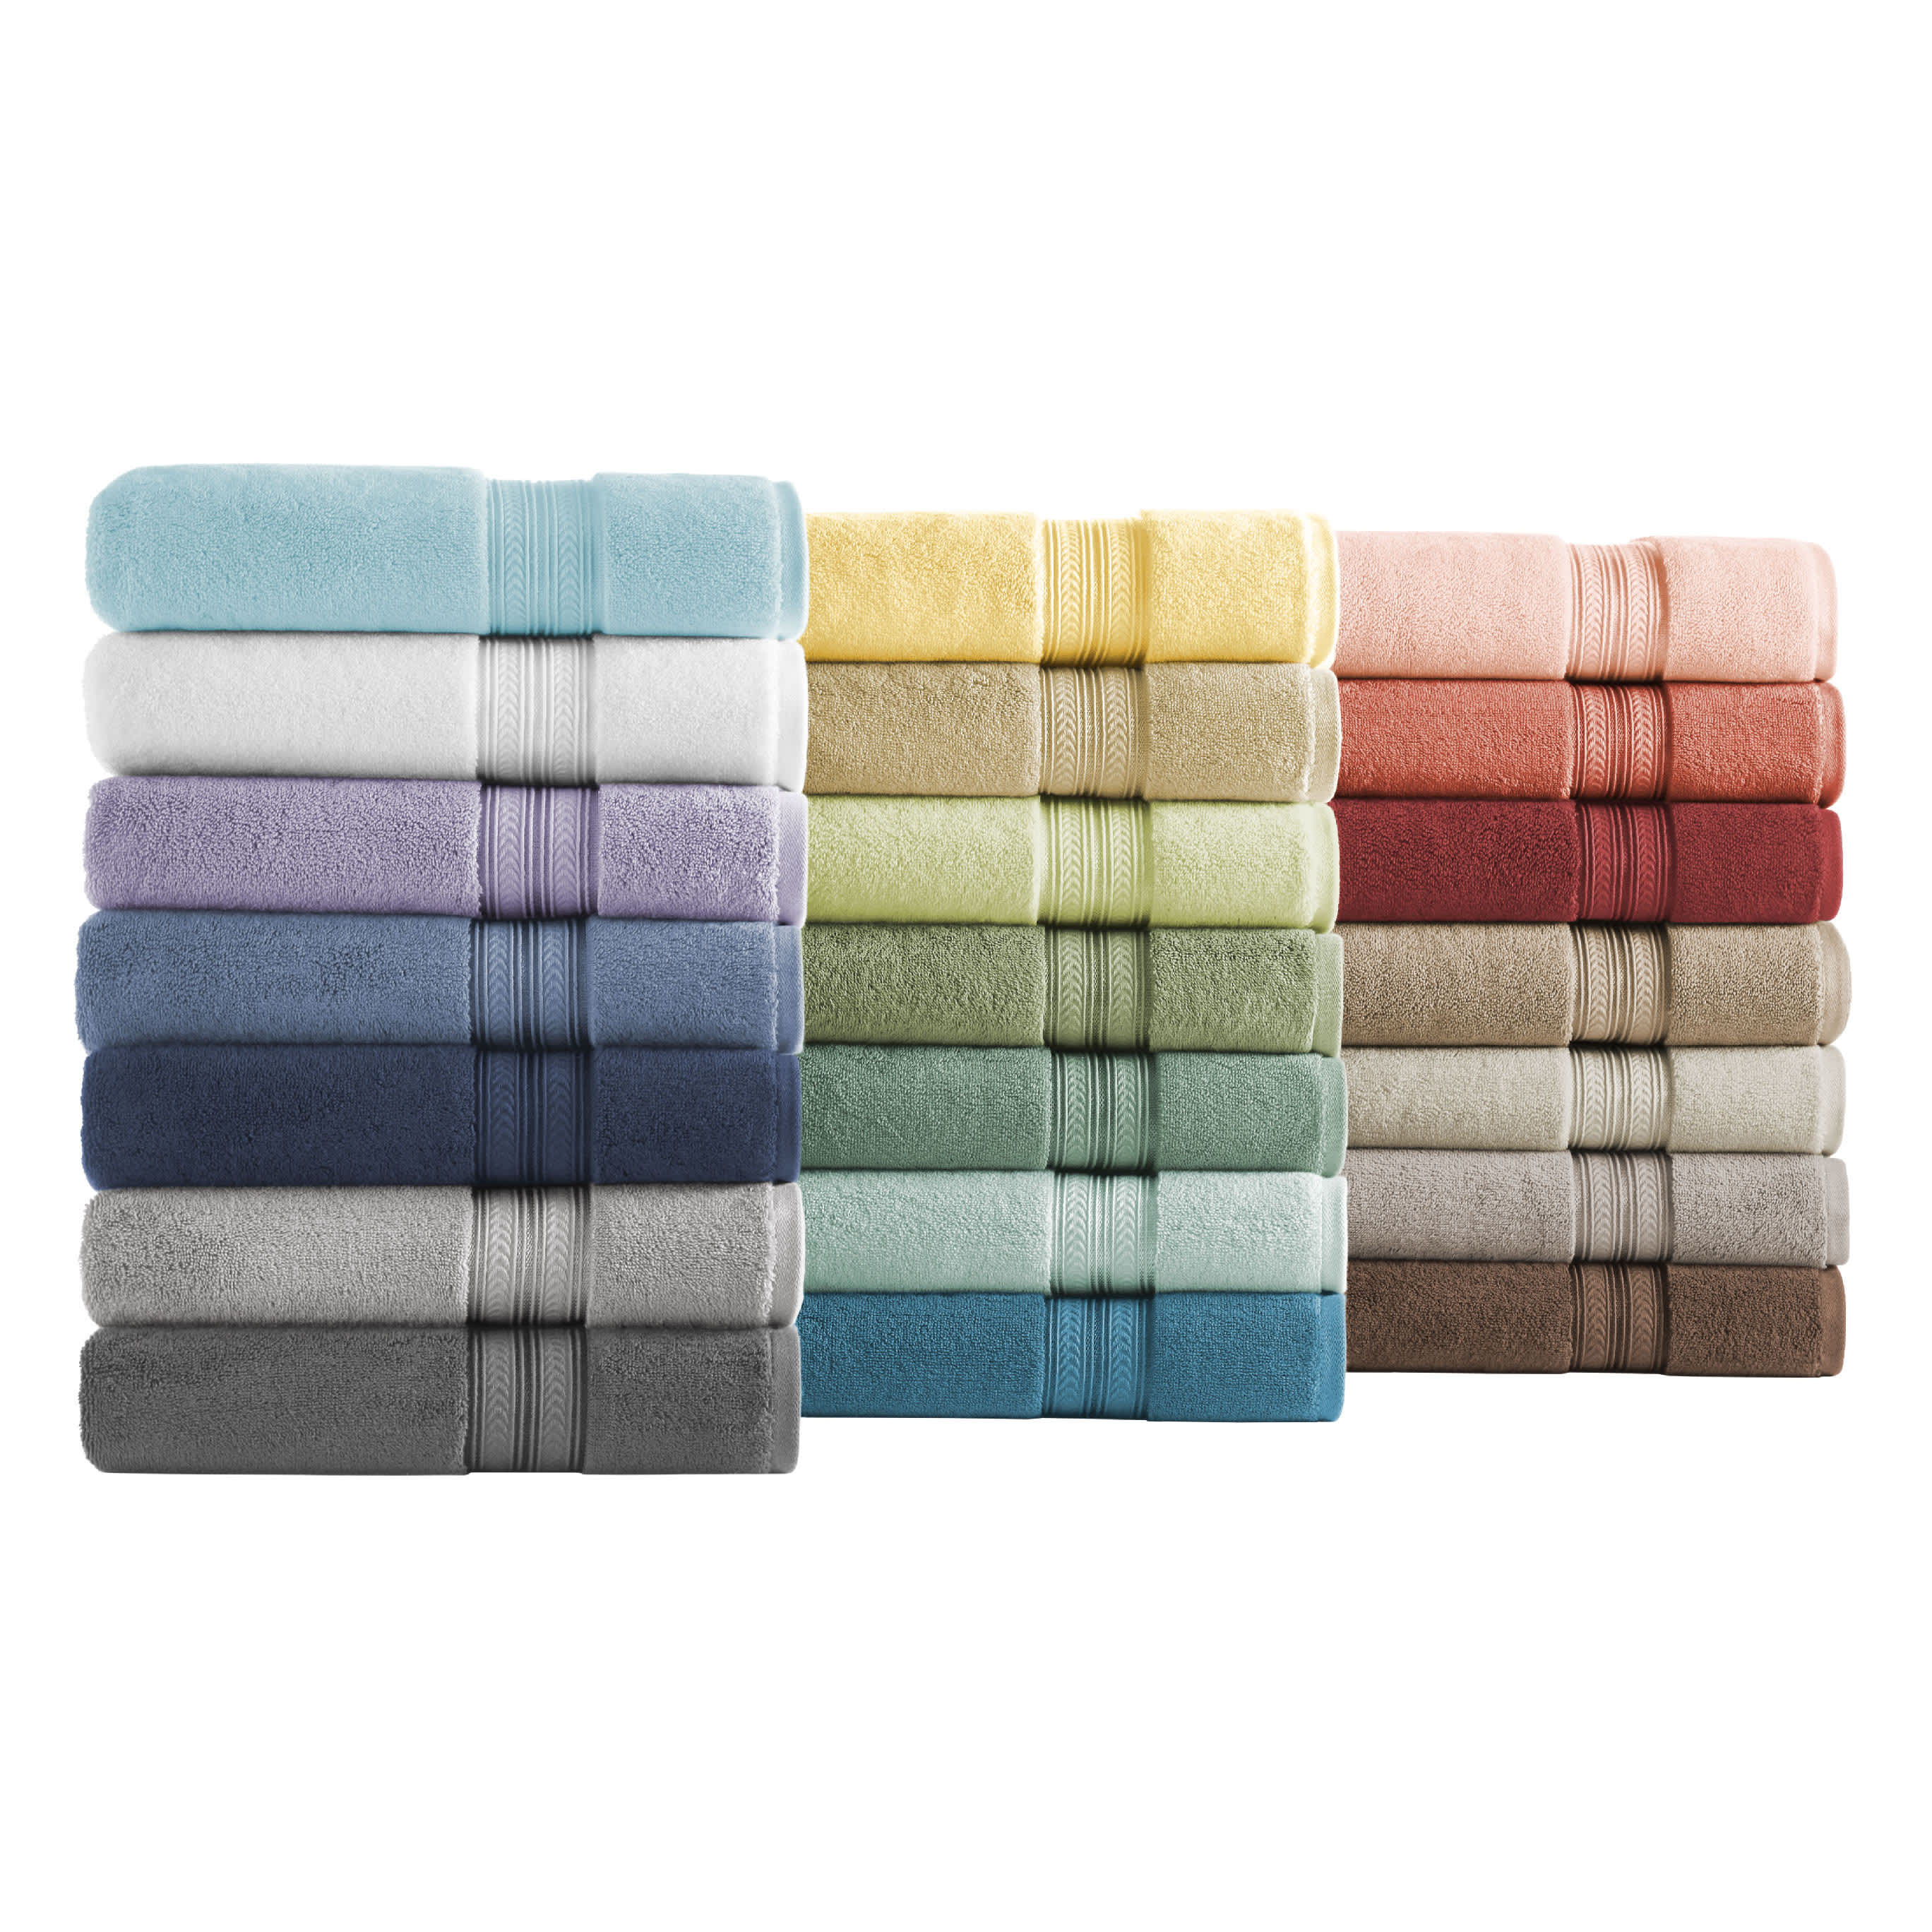 Where Can I Get Cheap Towels? A Guide to Affordable Bath Linens